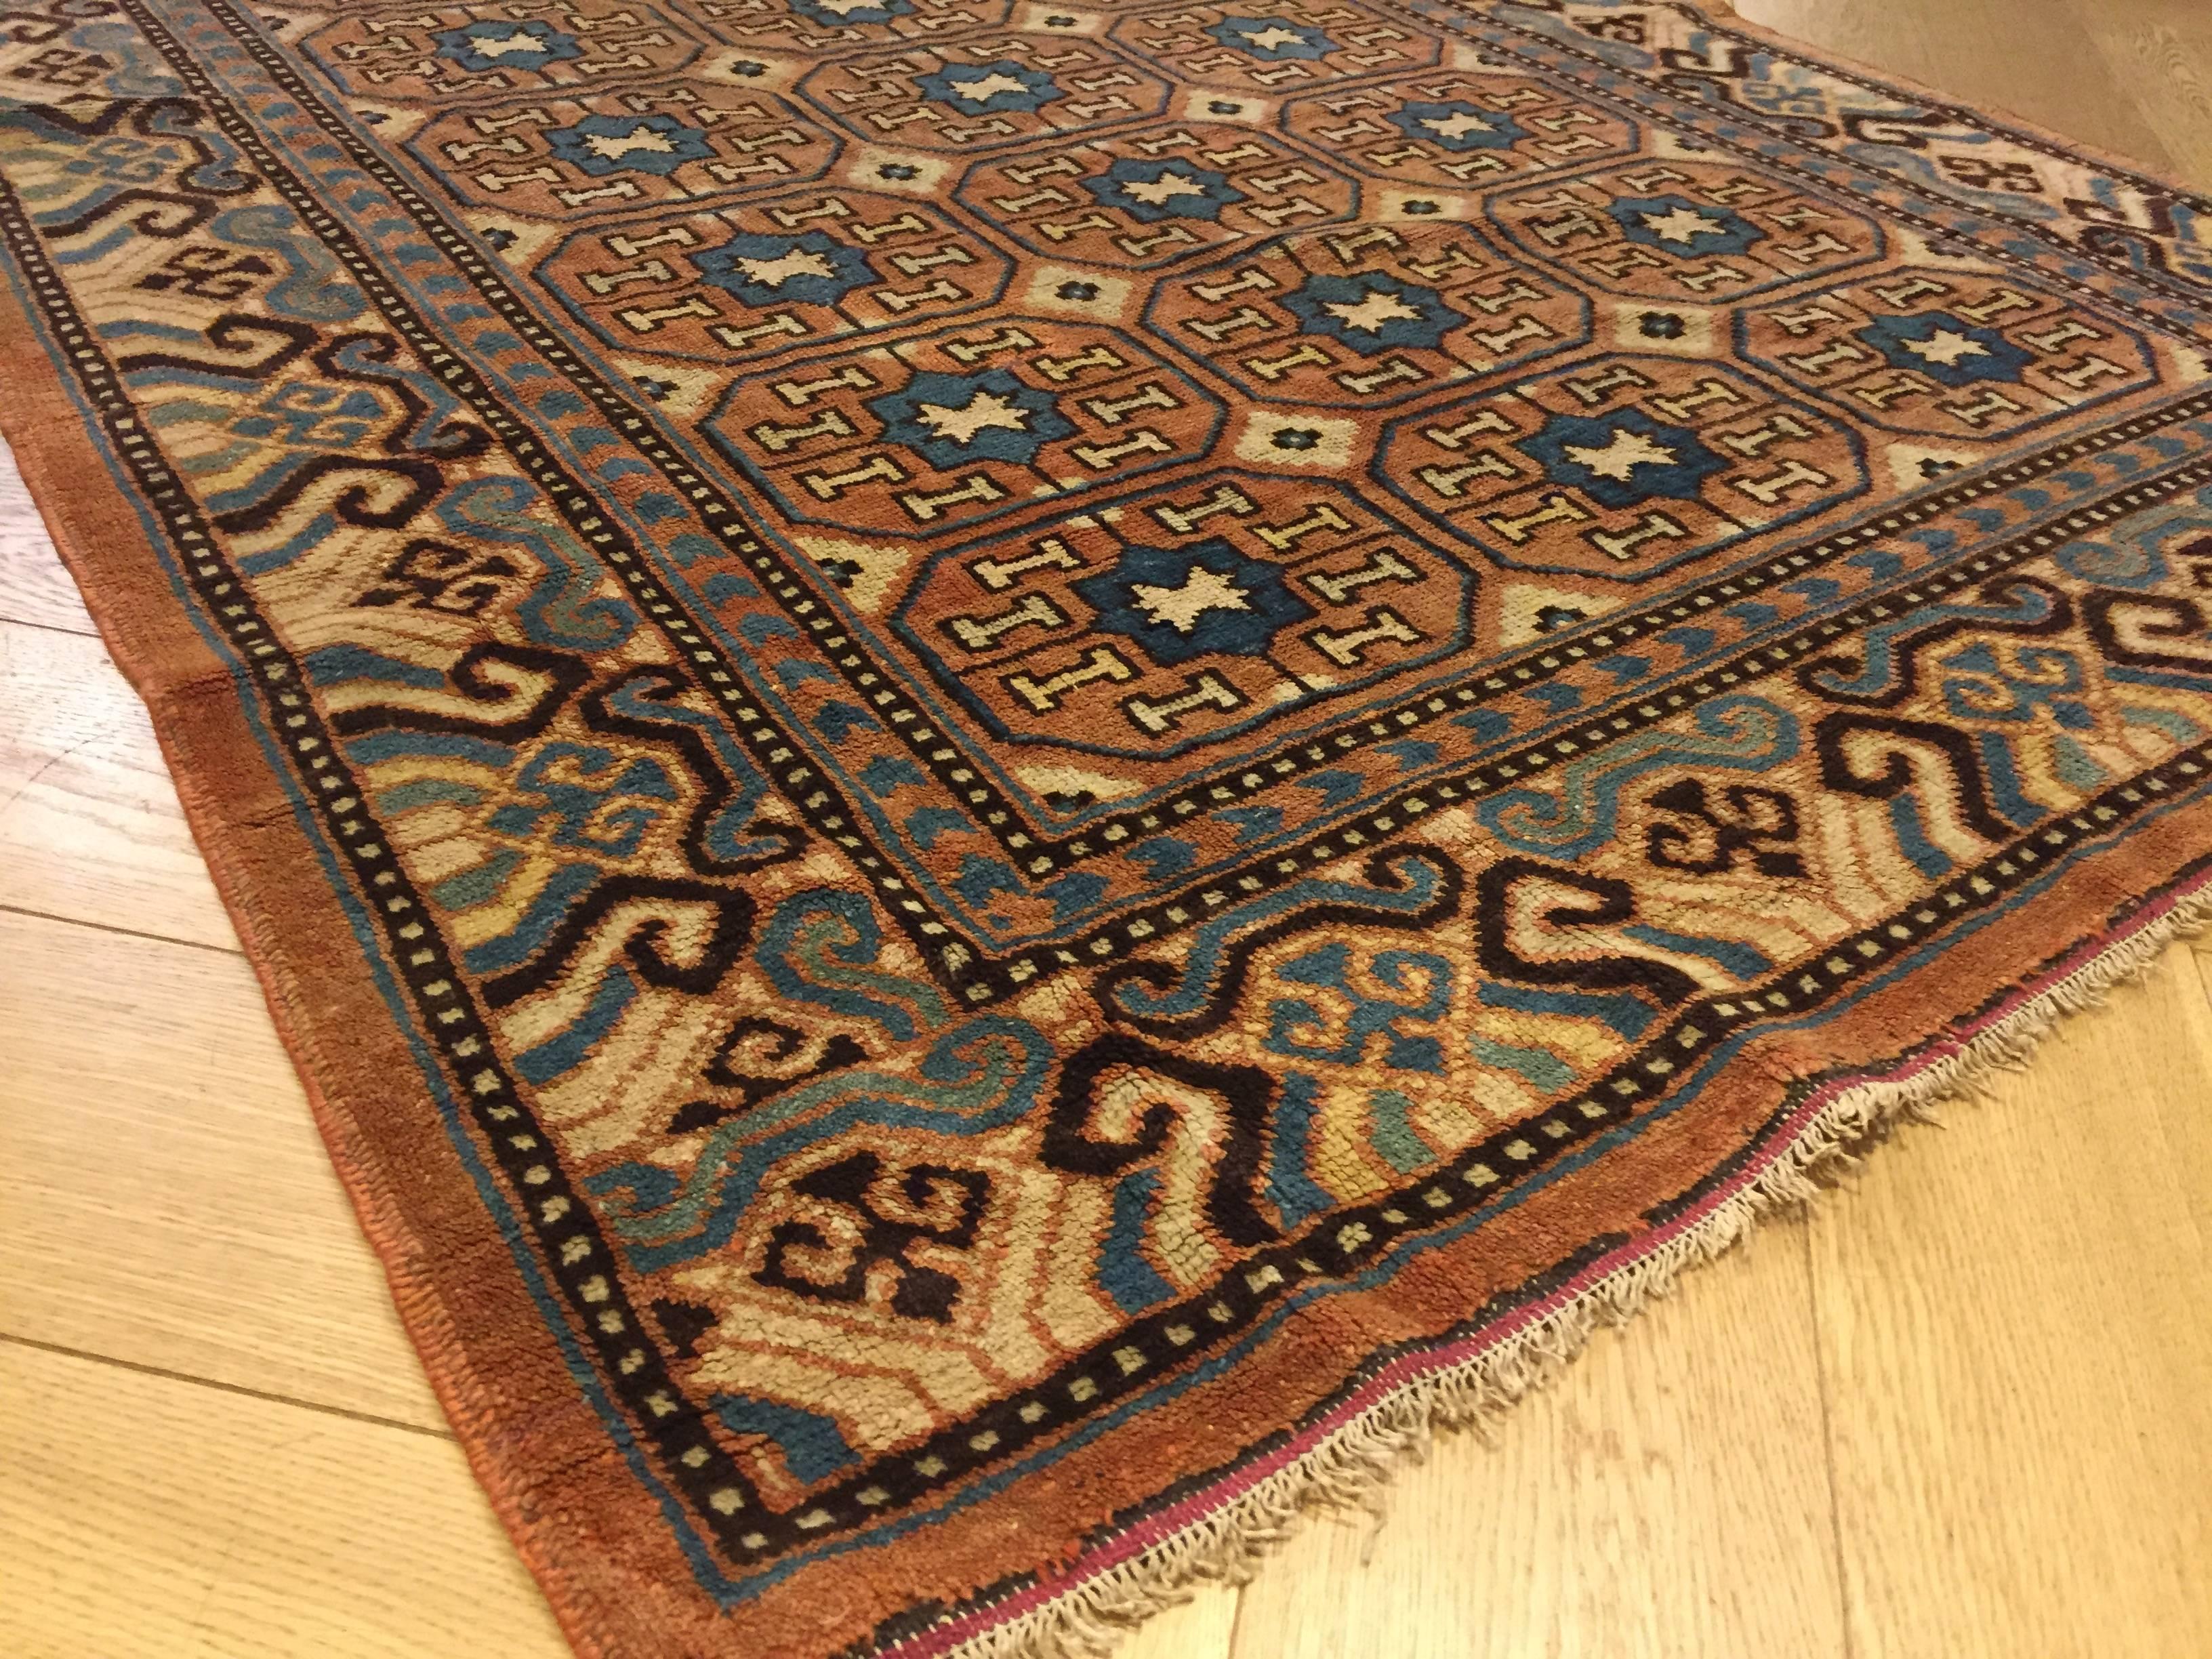 Chinoiserie 19th Century Brown and Blue Stylized Rosette Gul Chinese Khotan Rug, circa 1870s For Sale